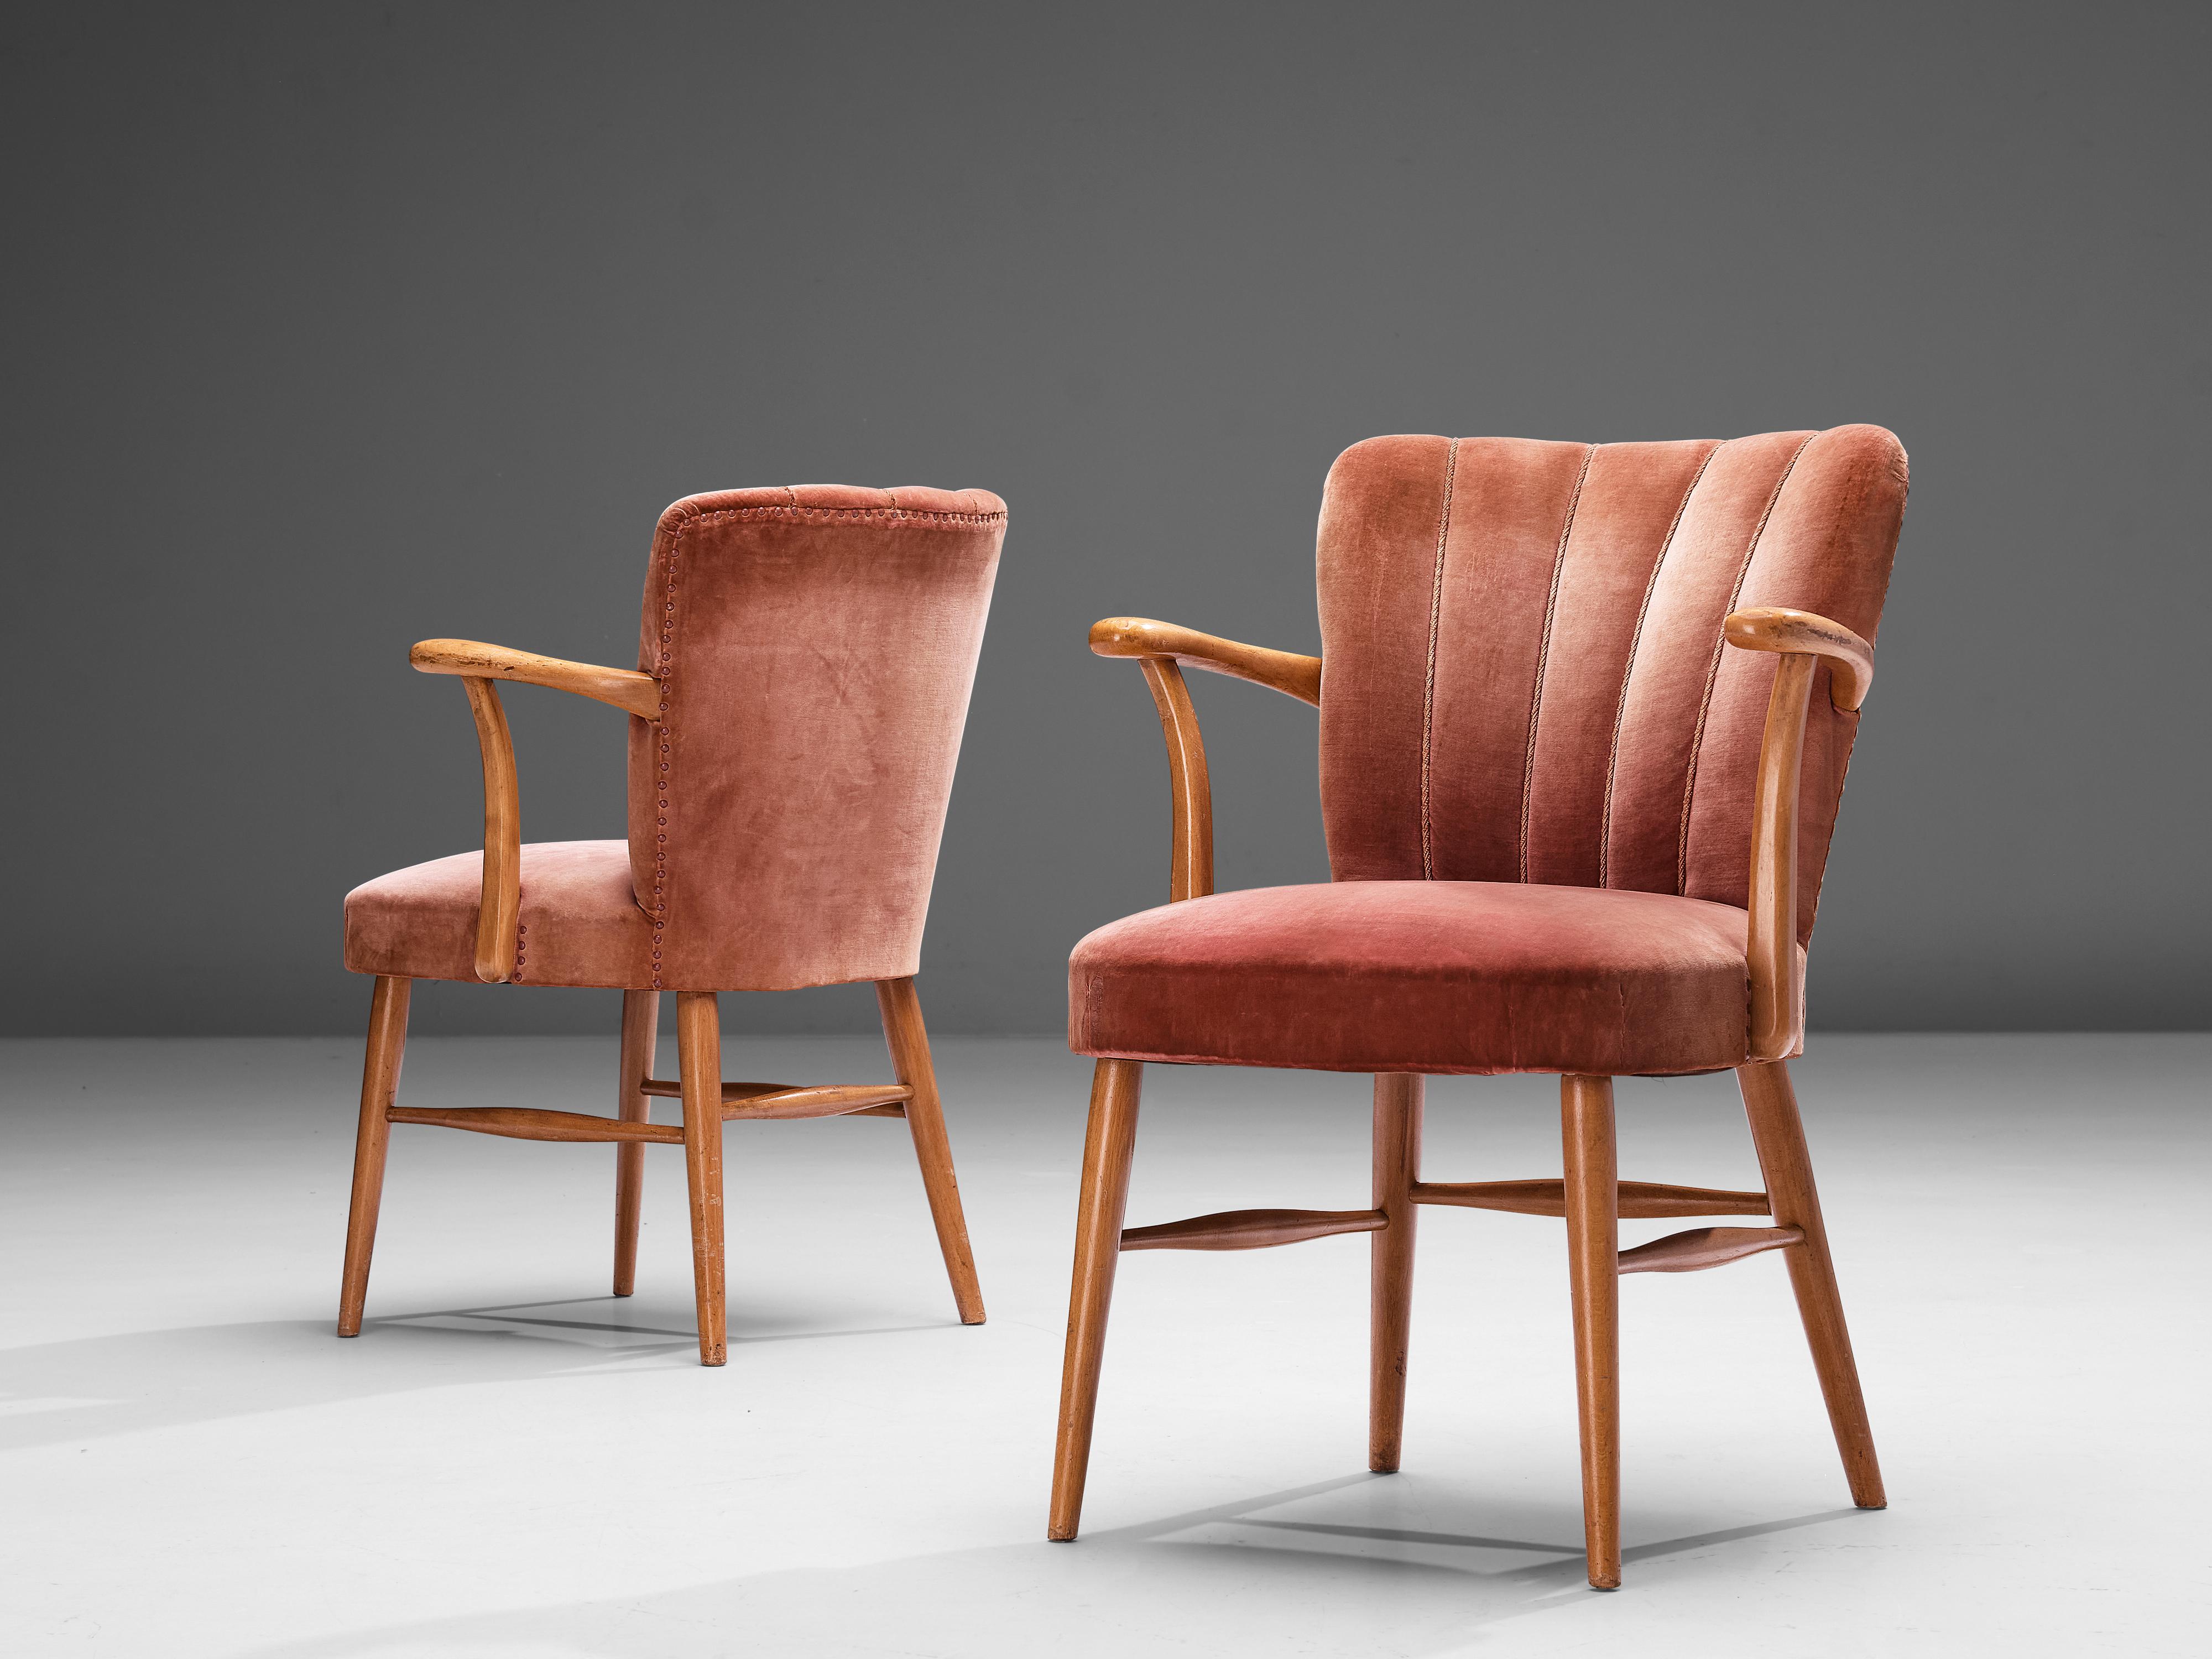 Armchairs, velvet, beech, brass, Europe, 1950s

Elegant armchairs in a soft pink velvet upholstery. A beech frame with armrests holds the seat and backrest that is highlighted with vertical lines ending in soft curves on top. The tufted lines